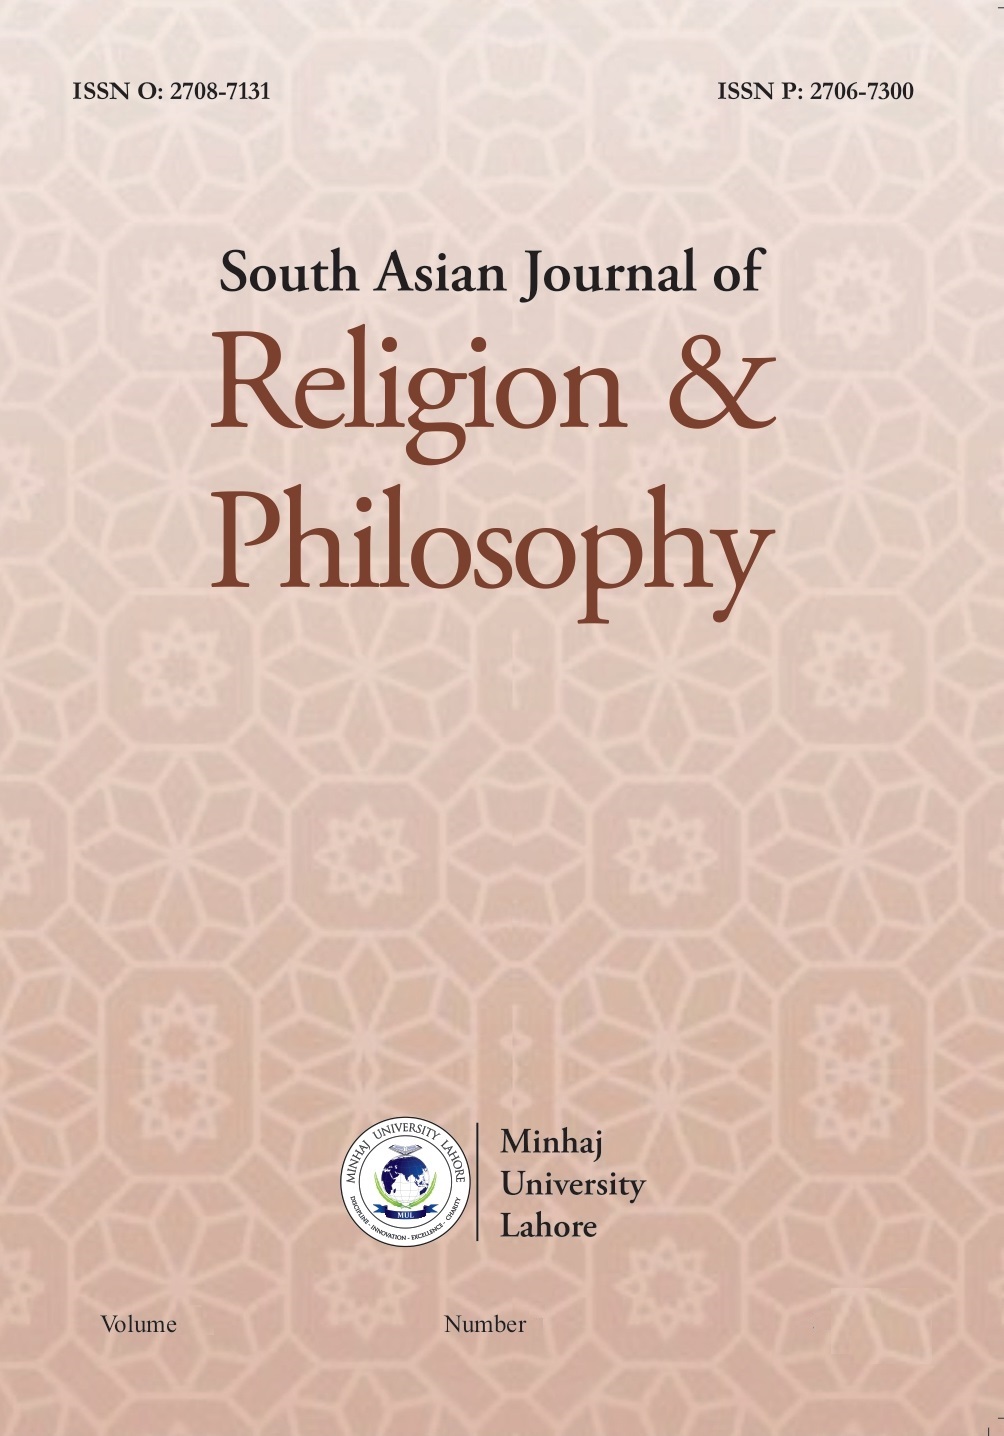 					View Vol. 2 No. 2 (2021): South Asian Journal of Religion & Philosophy
				